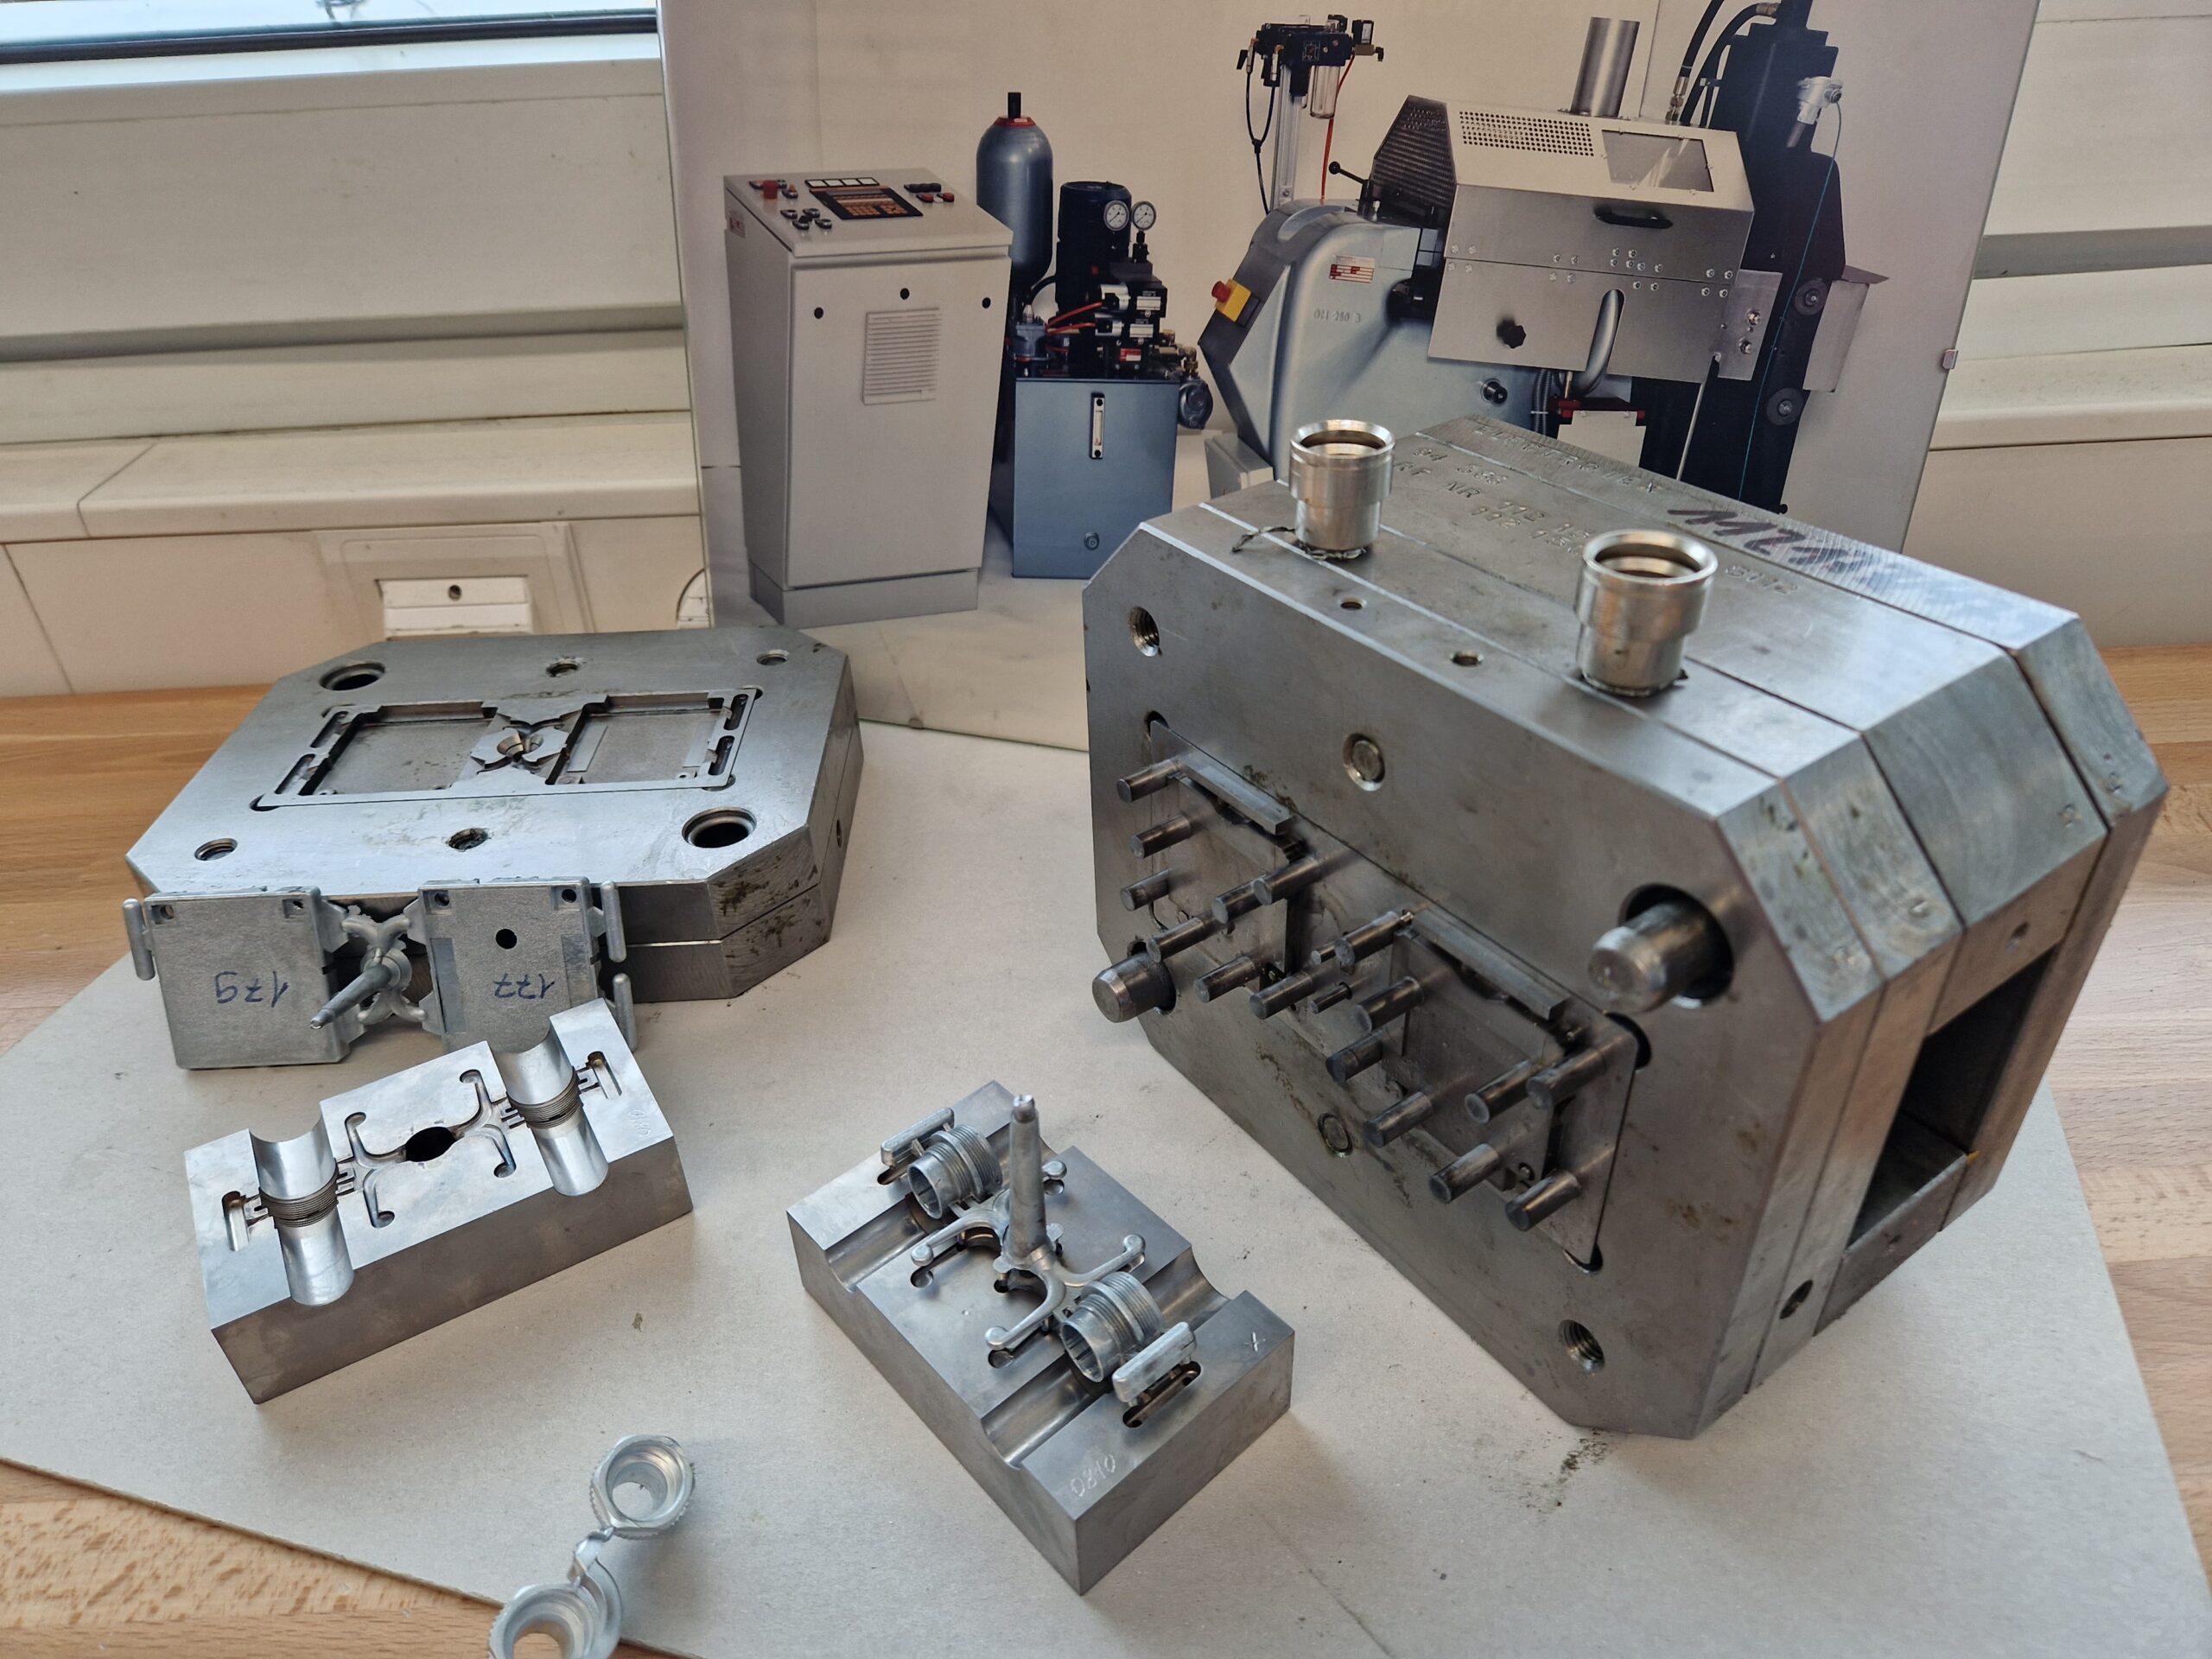 Examples of moulds and casting parts at Macrocast GmbH